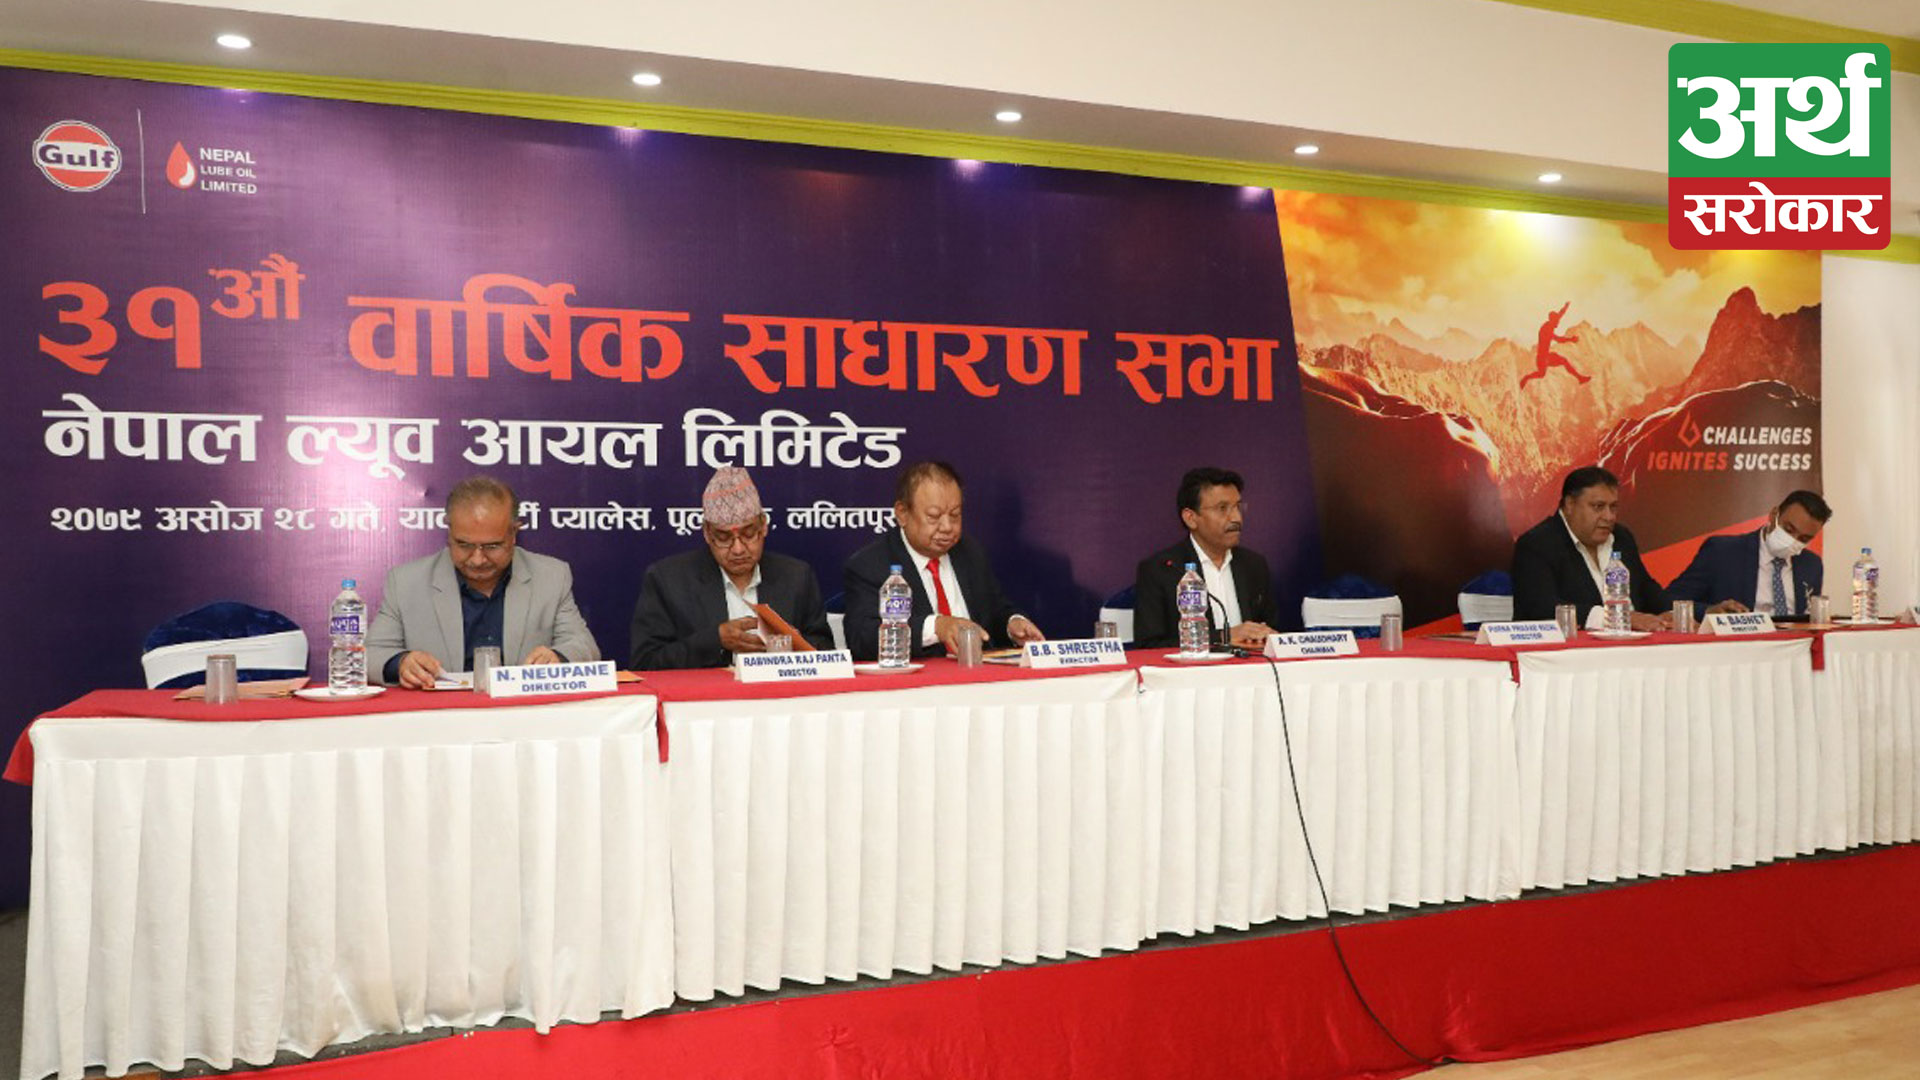 31st  Annual General Meet of Nepal Lube Oil Concluded